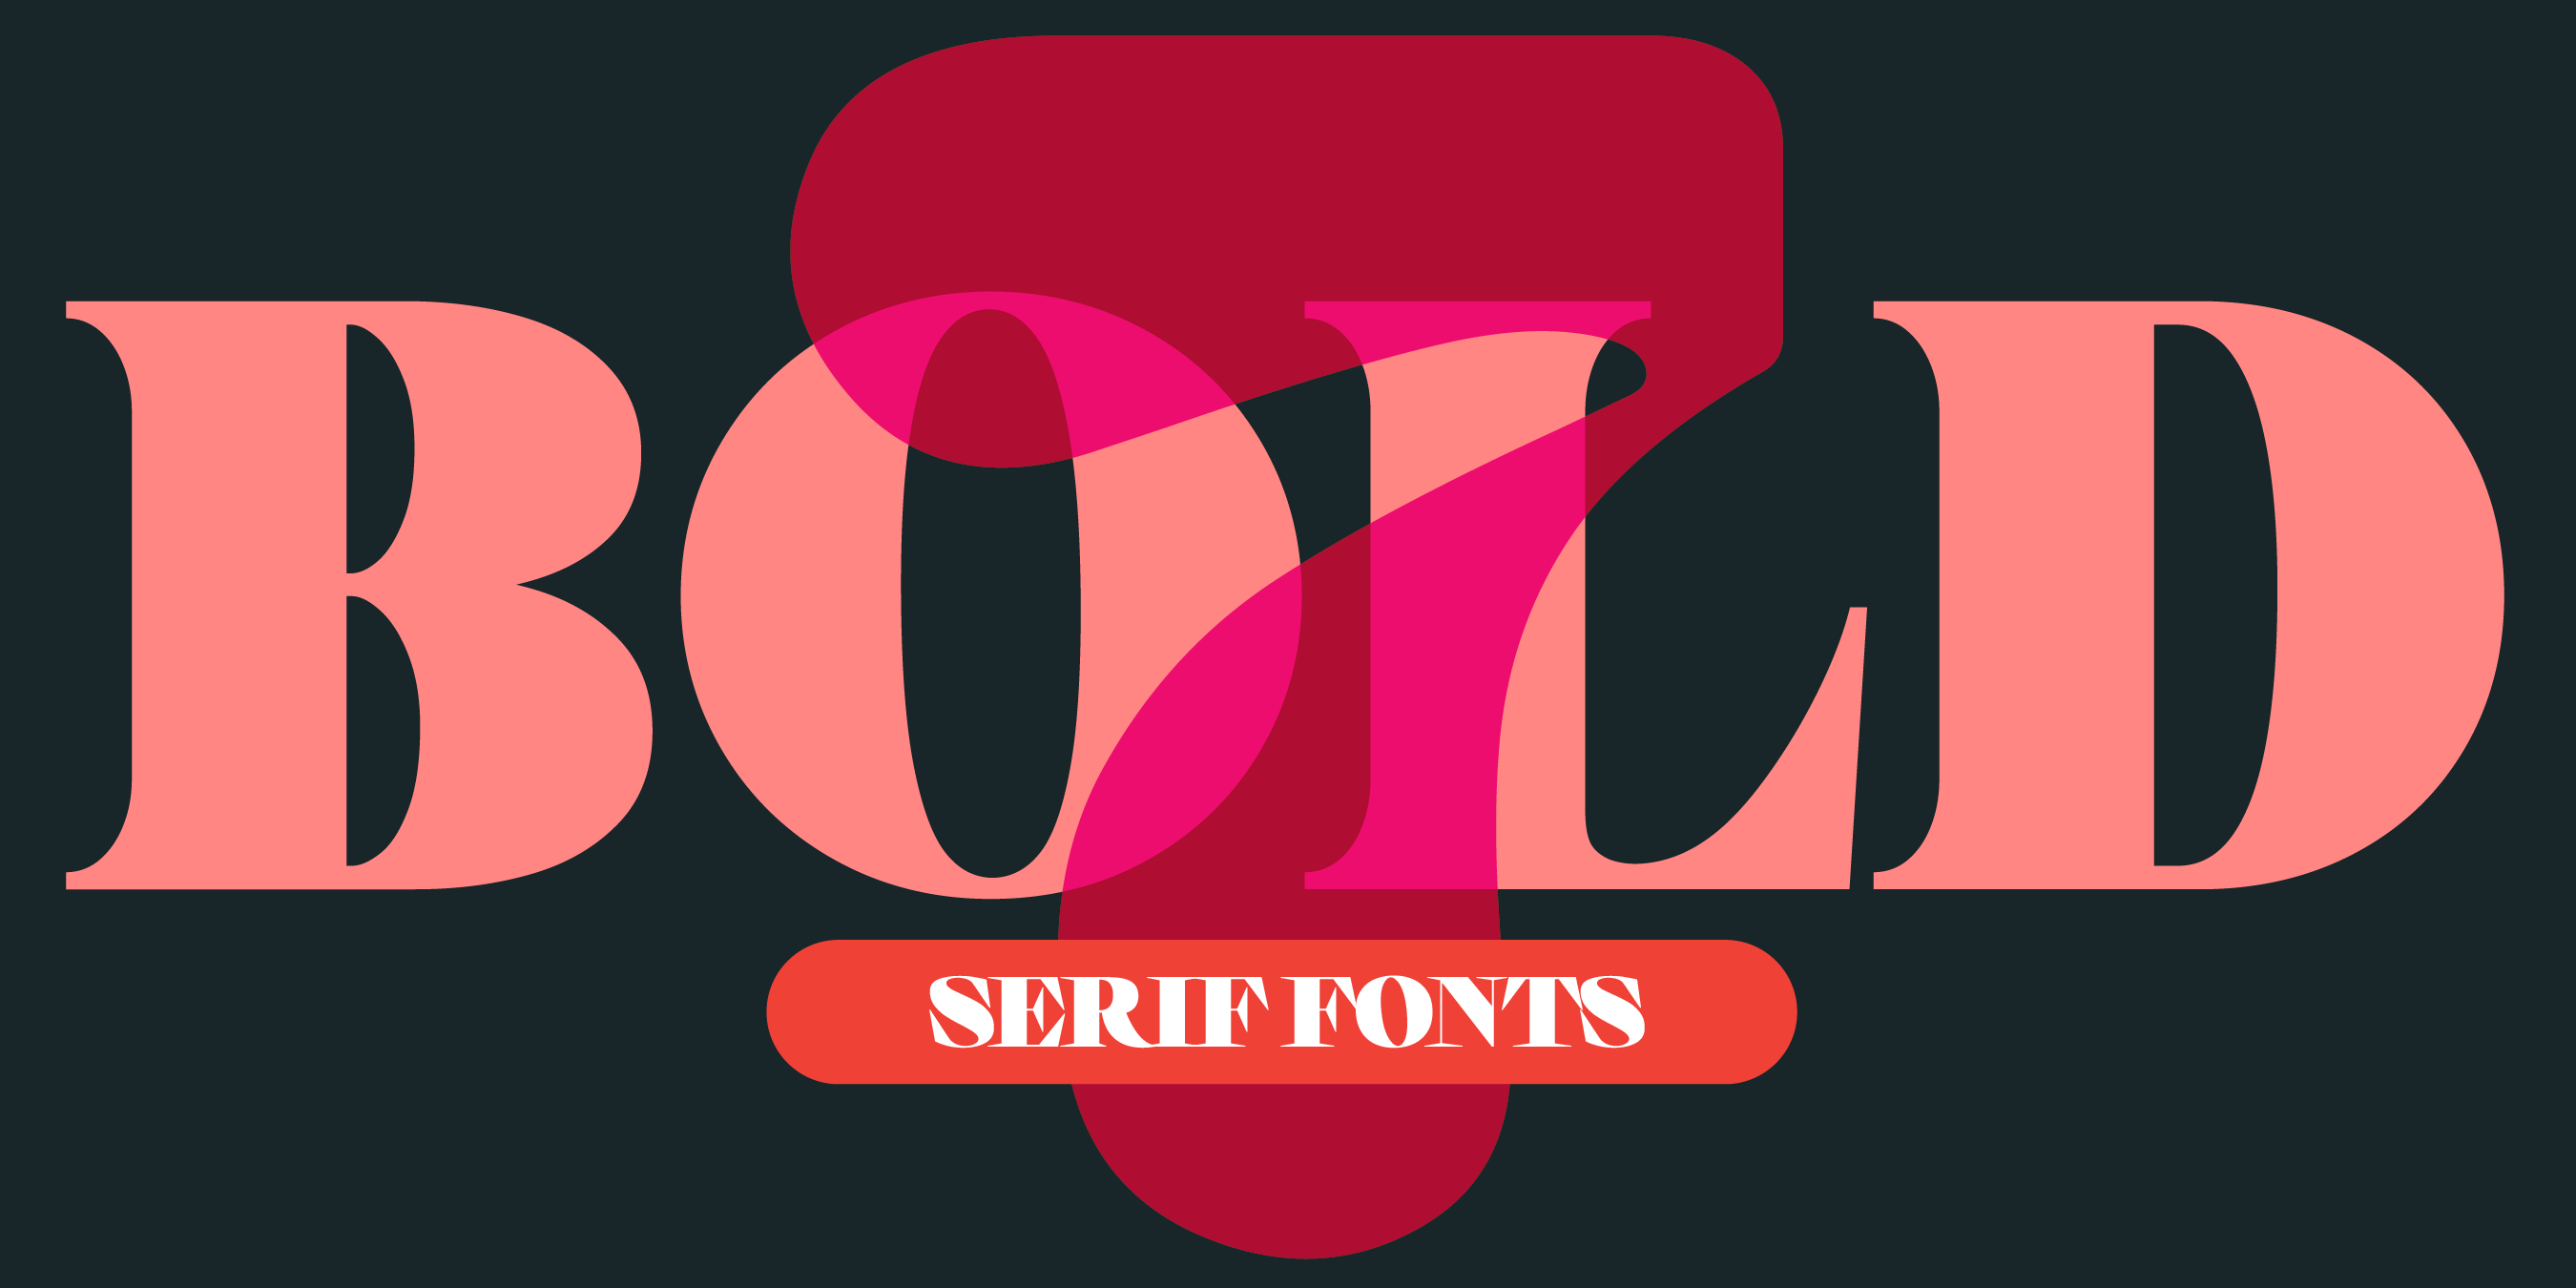 Where serifs stand strong: these bold serif fonts steal the show